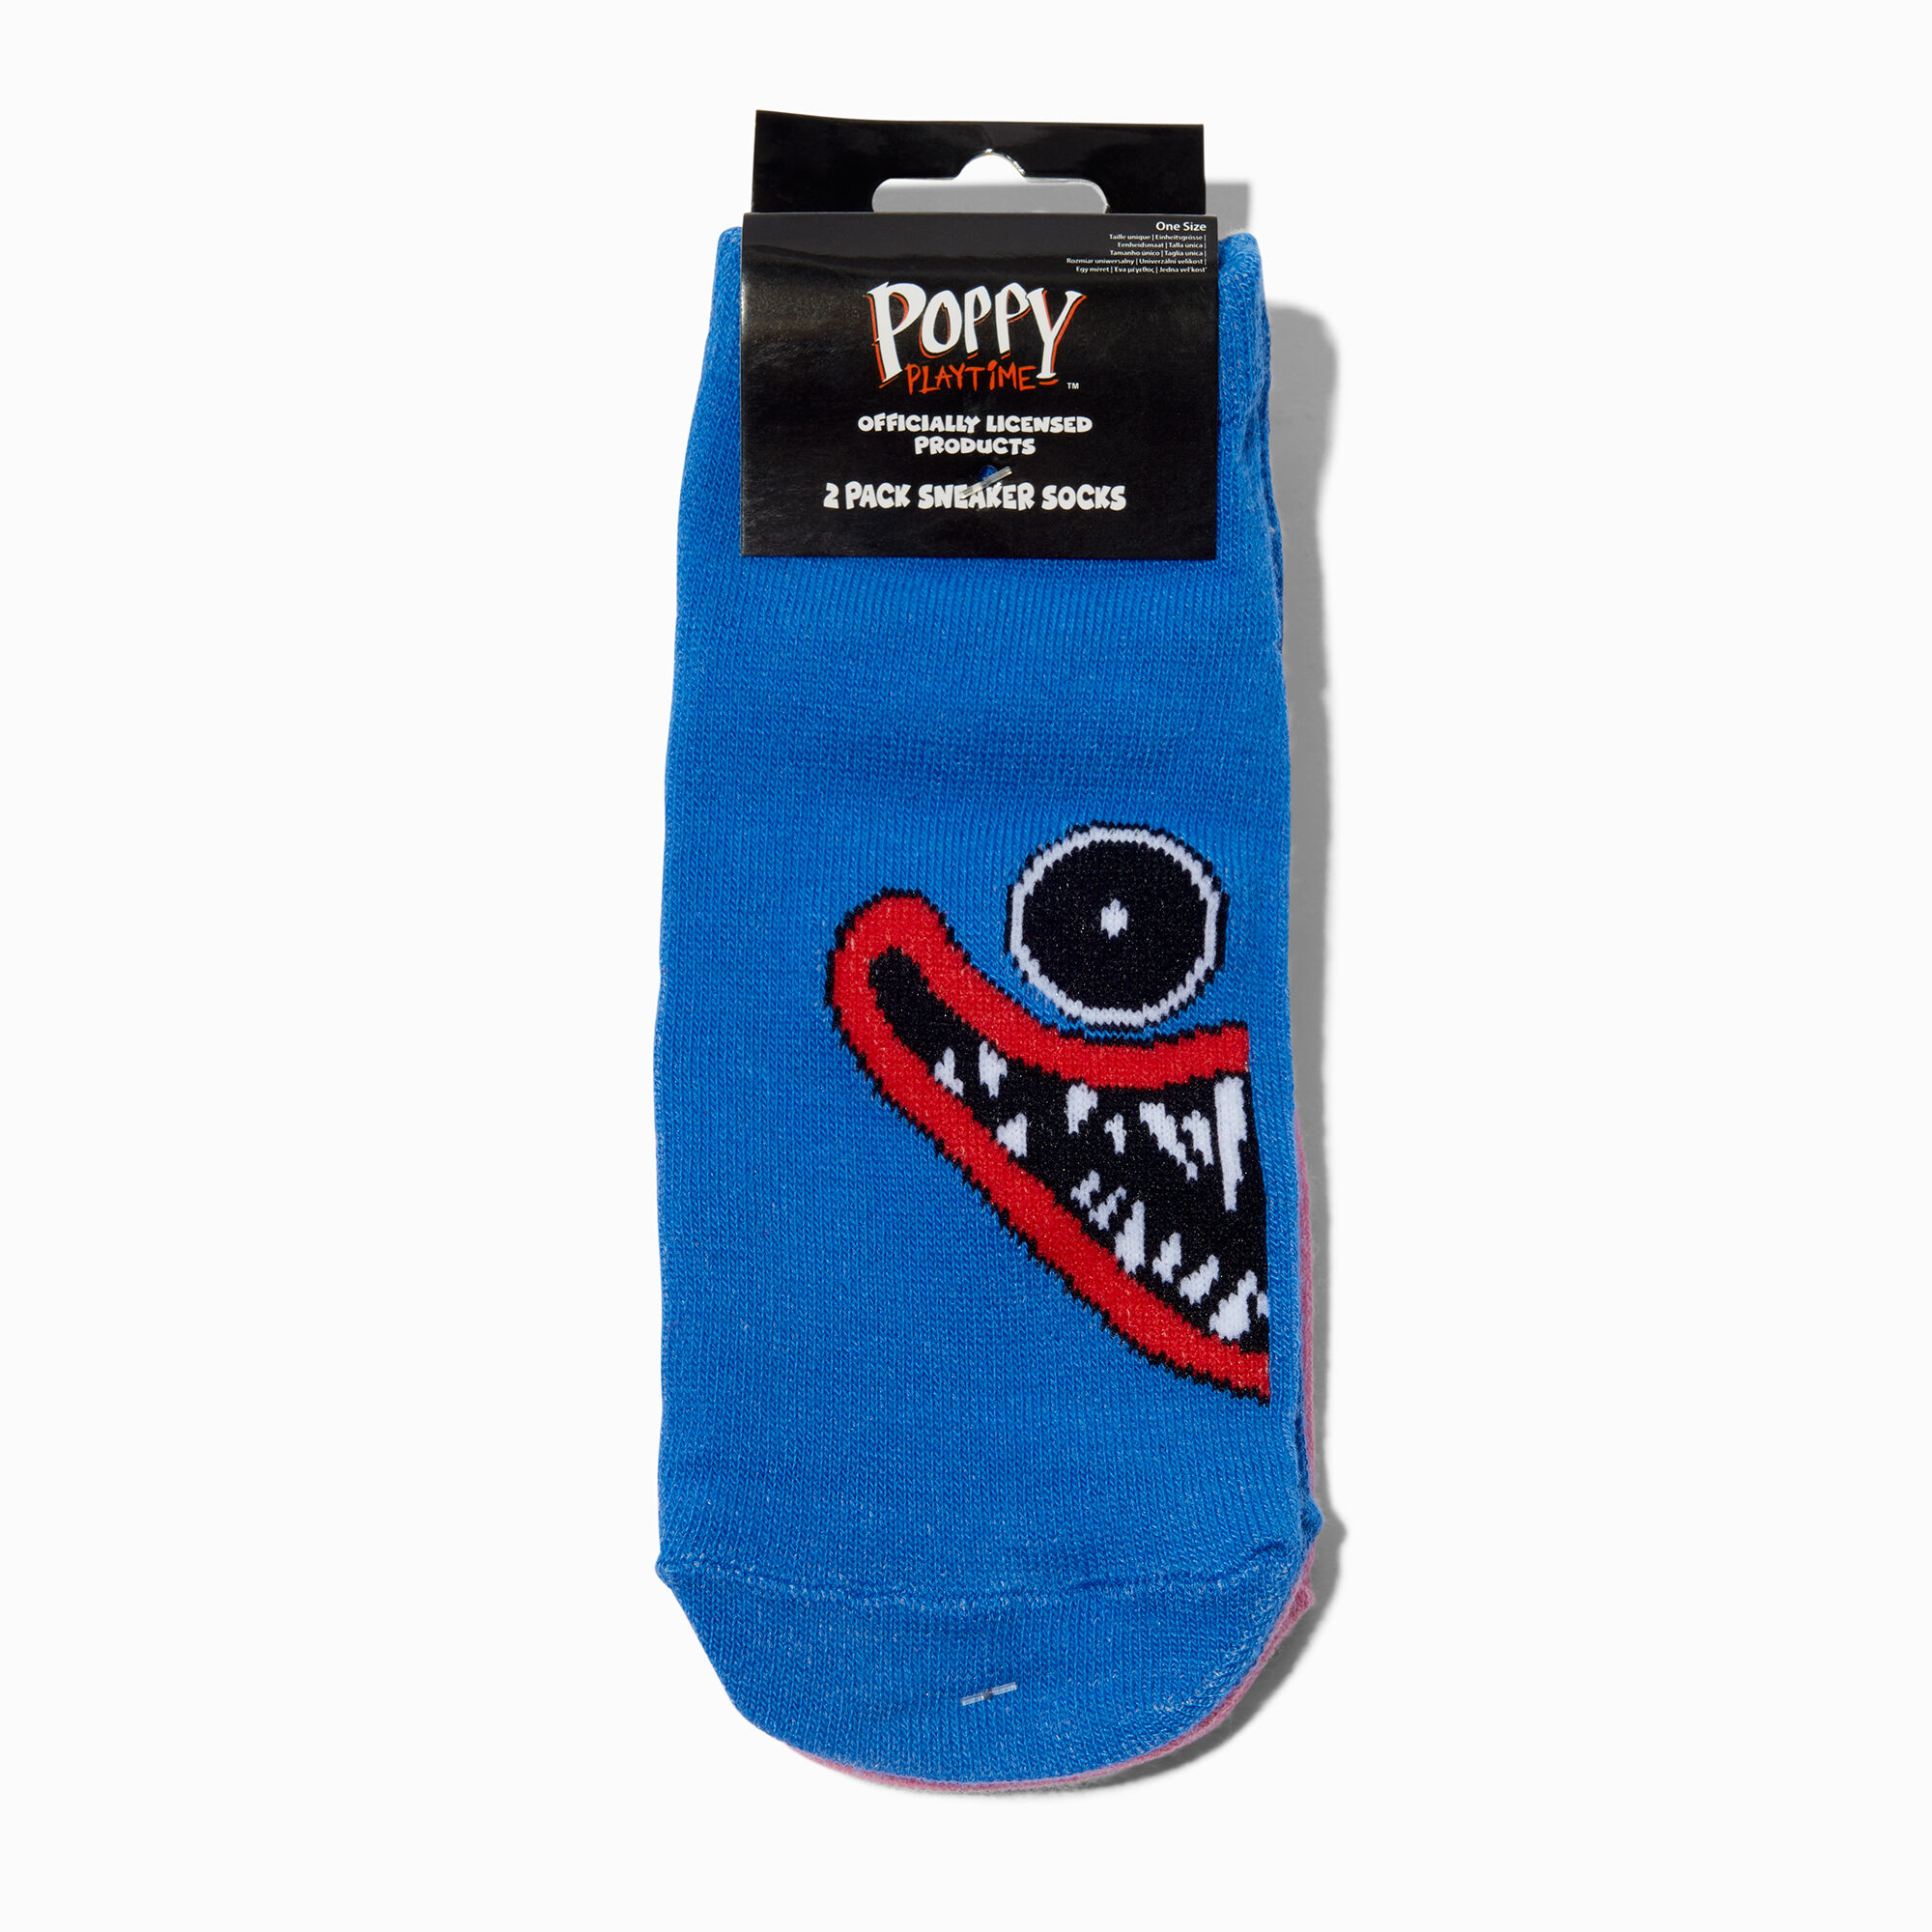 View Claires Five Nights At Freddys Sneaker Socks 2 Pack information